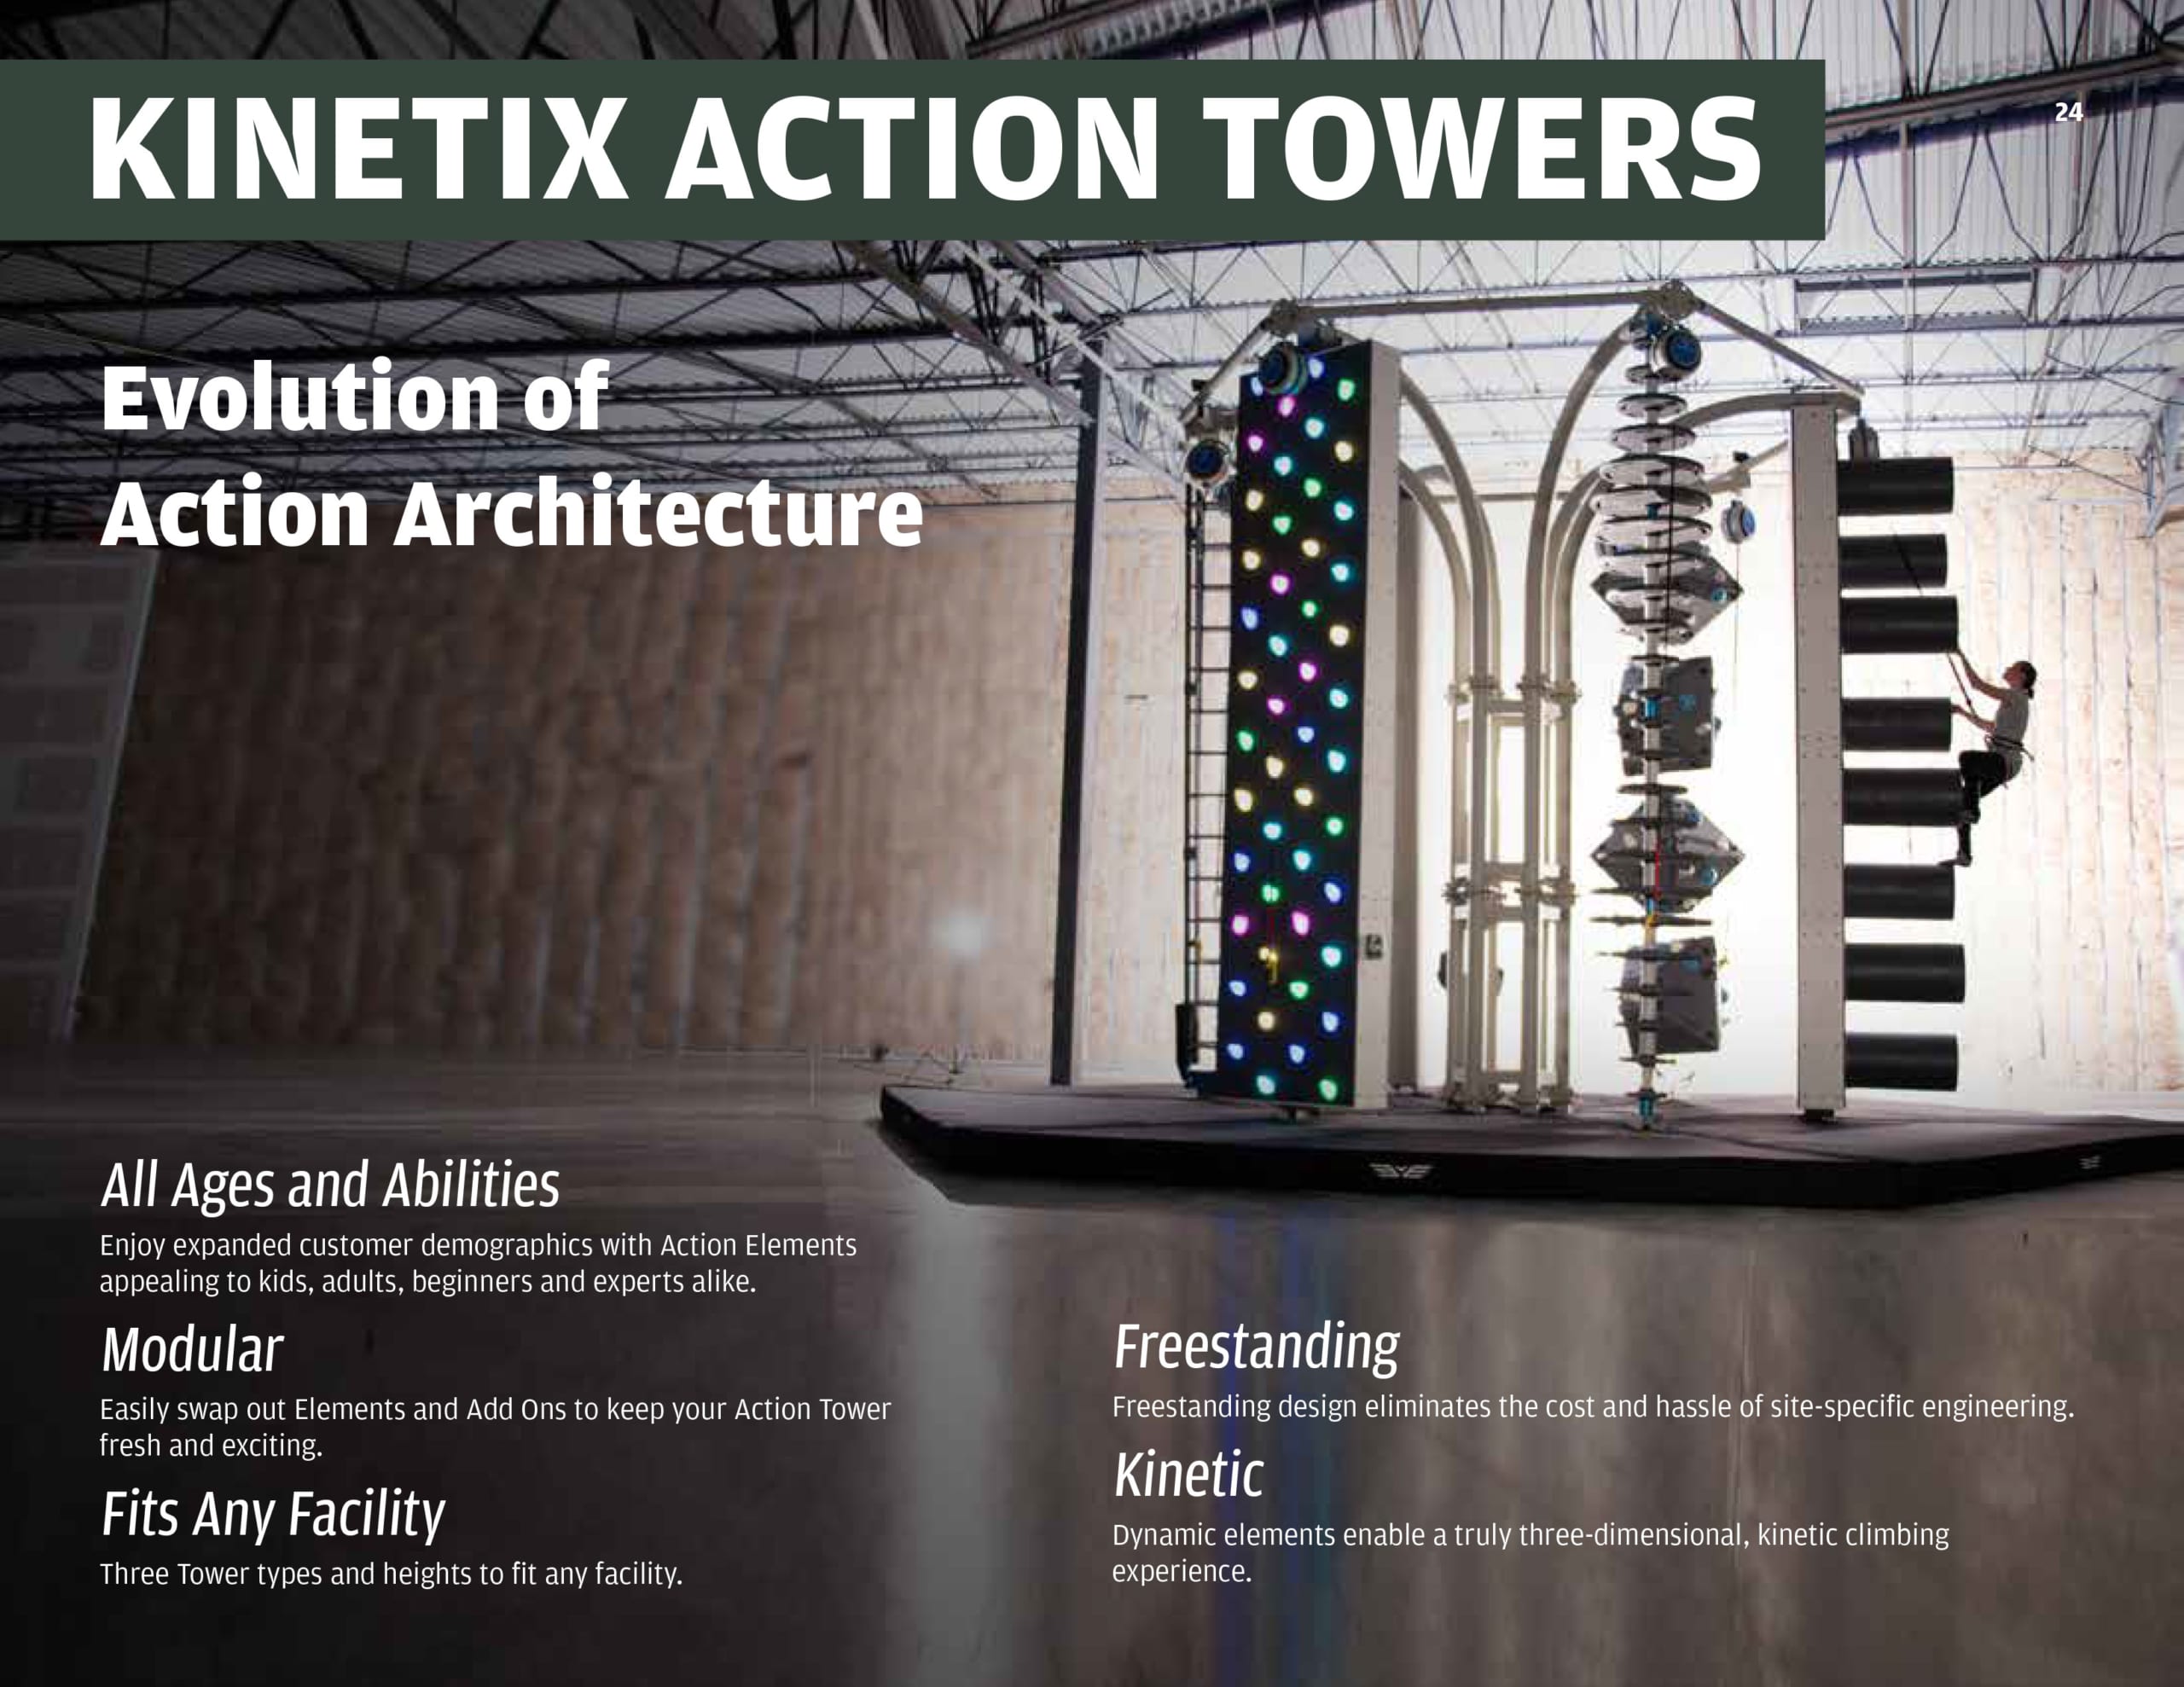 Image of the Kinetix Action Towers by El Dorado climbing.